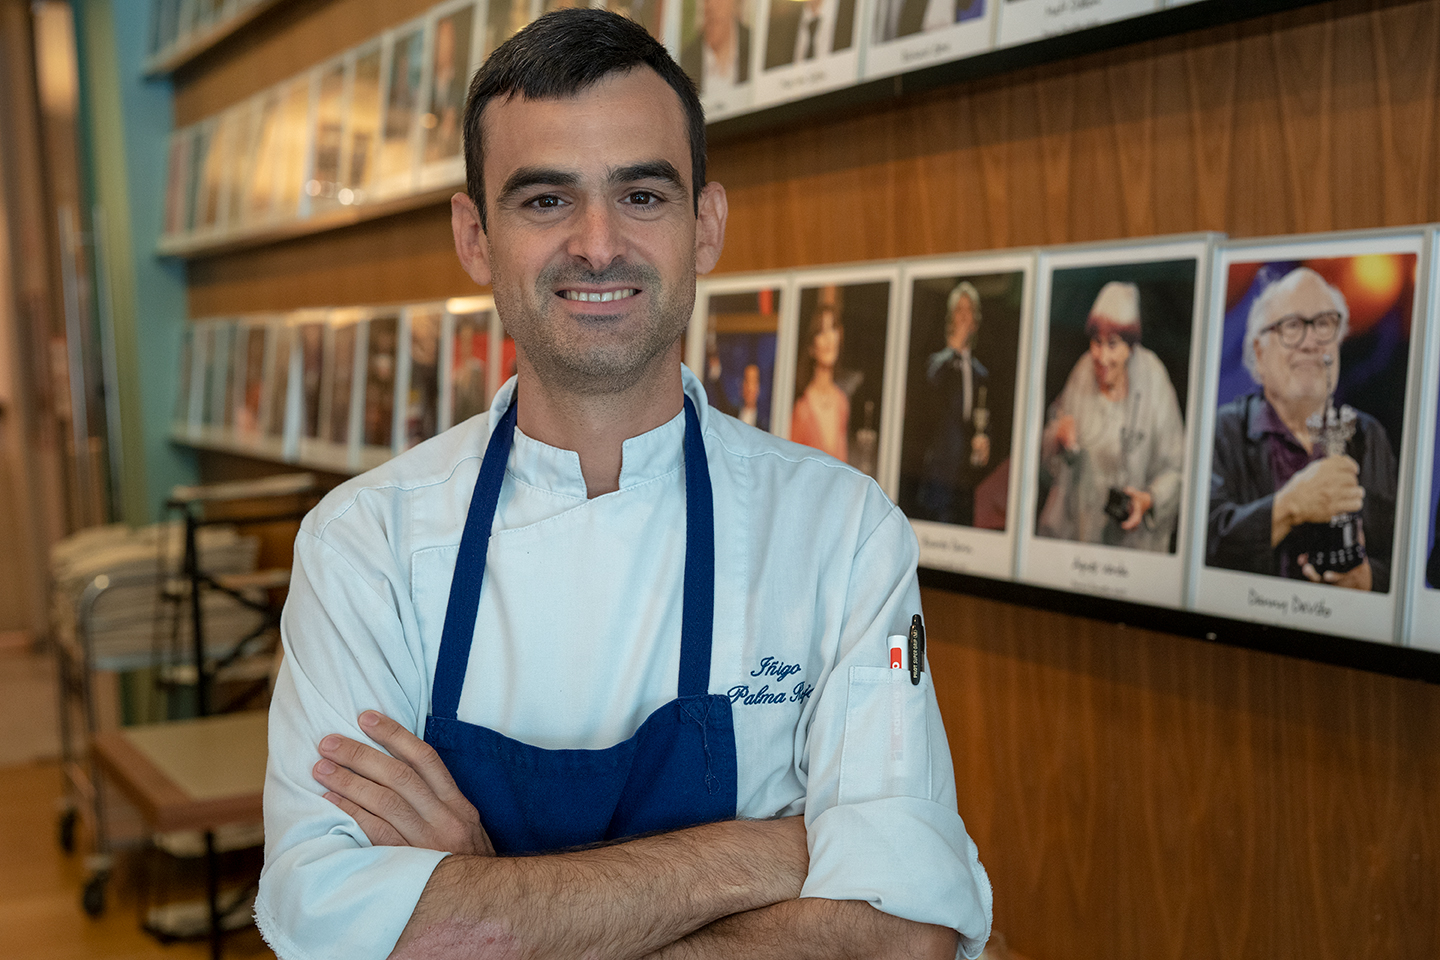 Iñigo Palma: I would highlight the shift from lifelong cold pintxos to cooked dishes. That commitment to sophisticated pintxos.